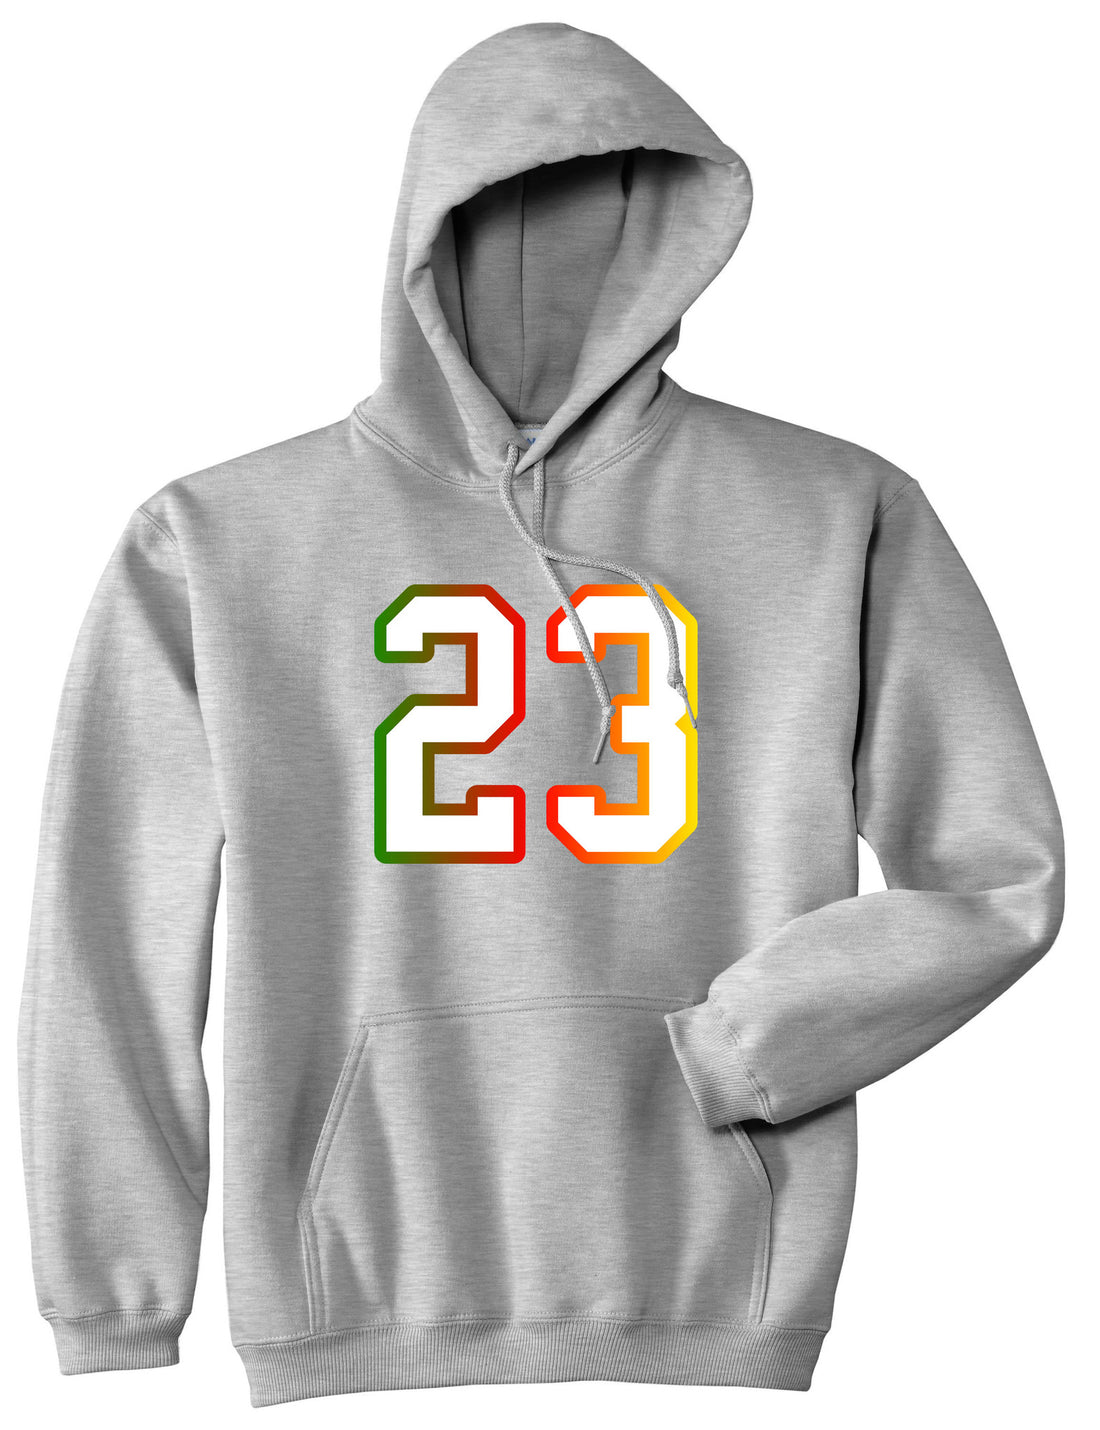 23 Cement Print Colorful Jersey Pullover Hoodie in Grey By Kings Of NY